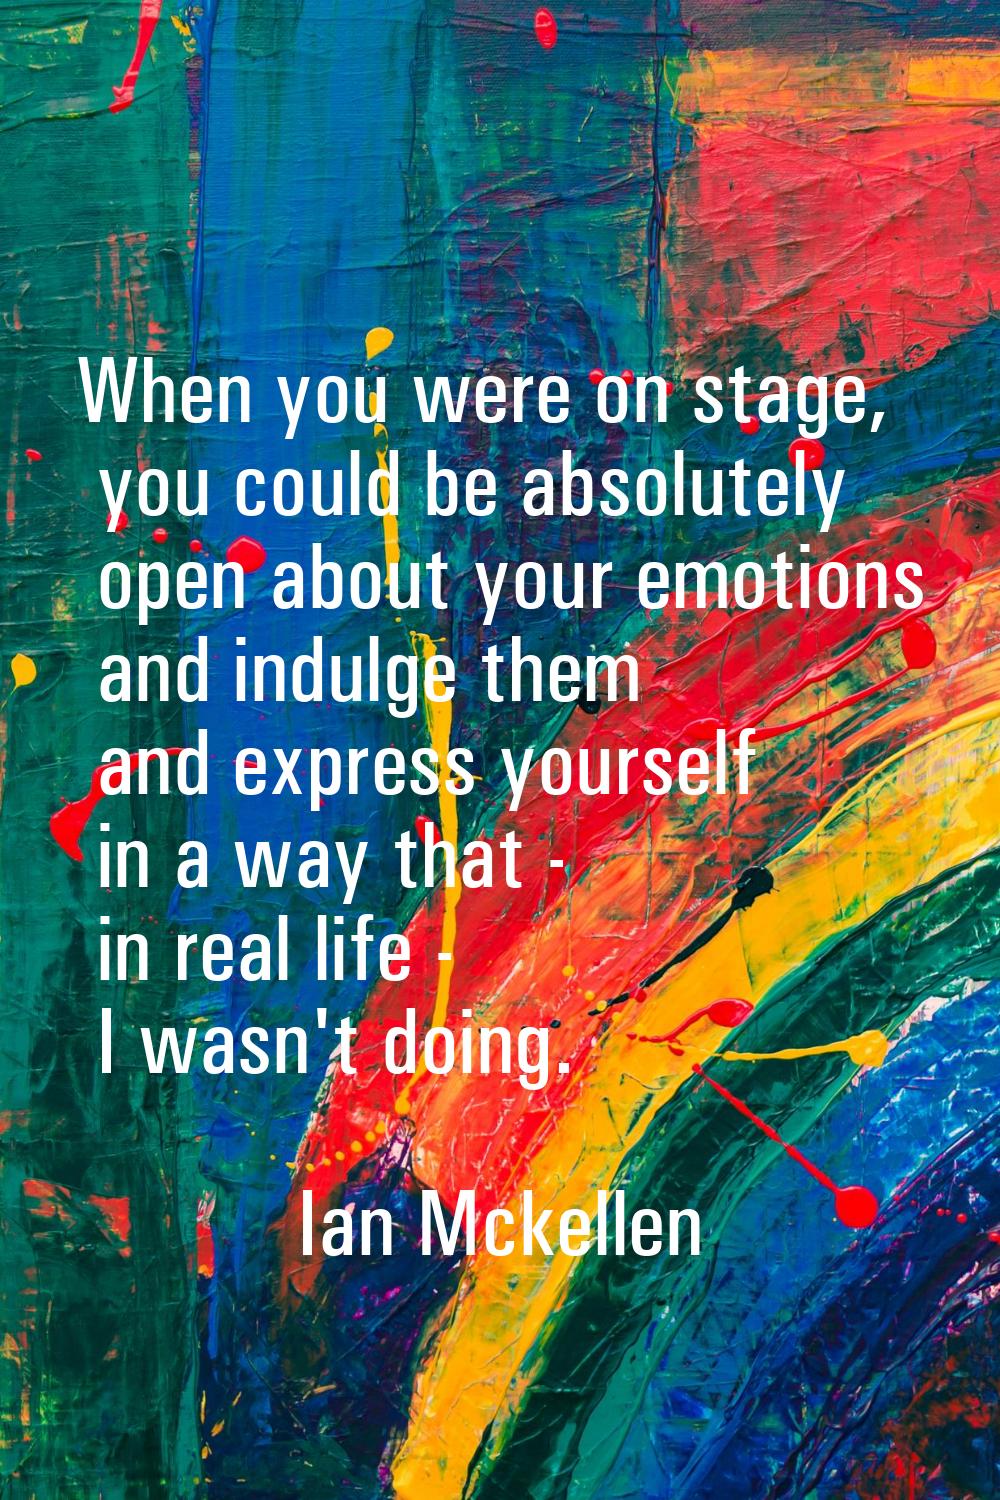 When you were on stage, you could be absolutely open about your emotions and indulge them and expre